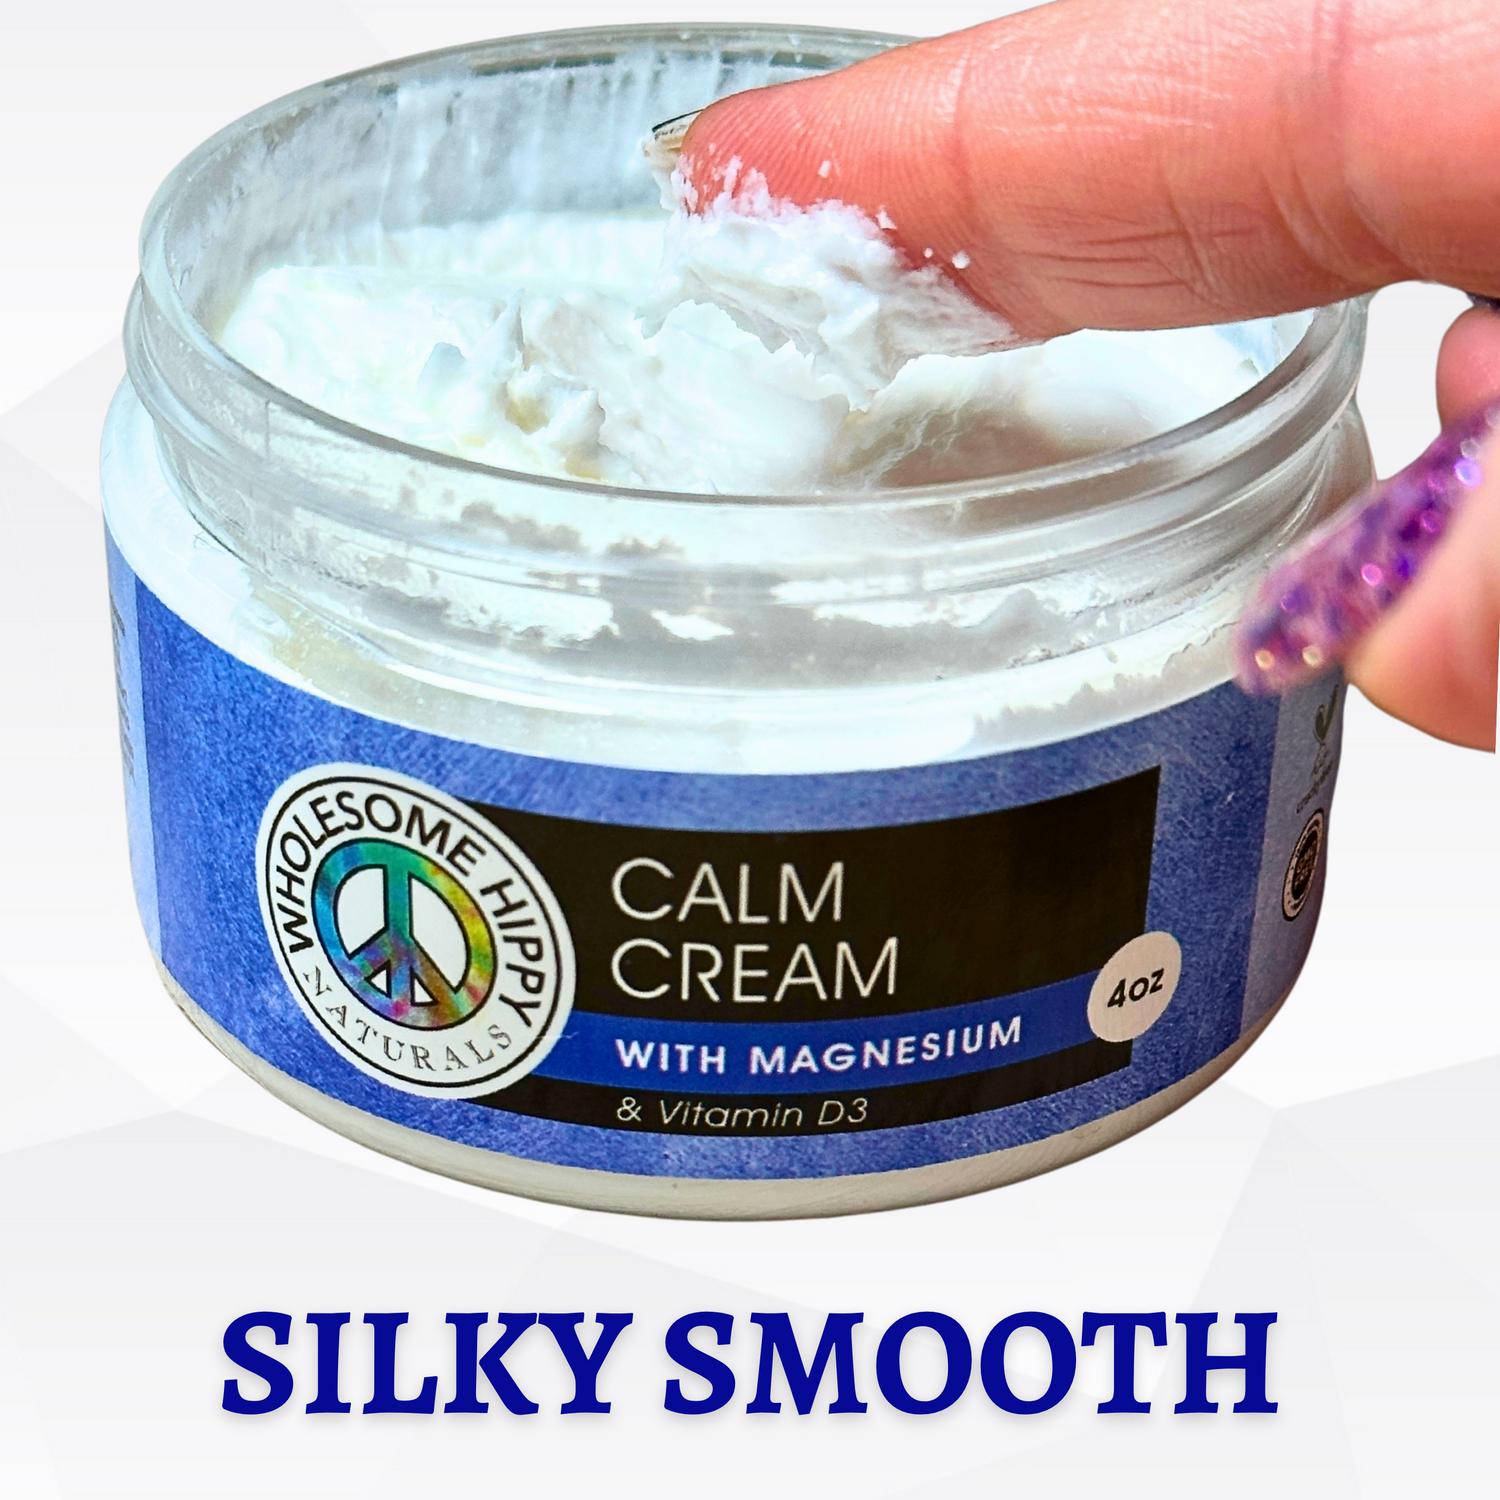 A finger is shown scooping out a silky smooth white cream from a jar labeled Calm Cream with Magnesium and Vitamin D3.